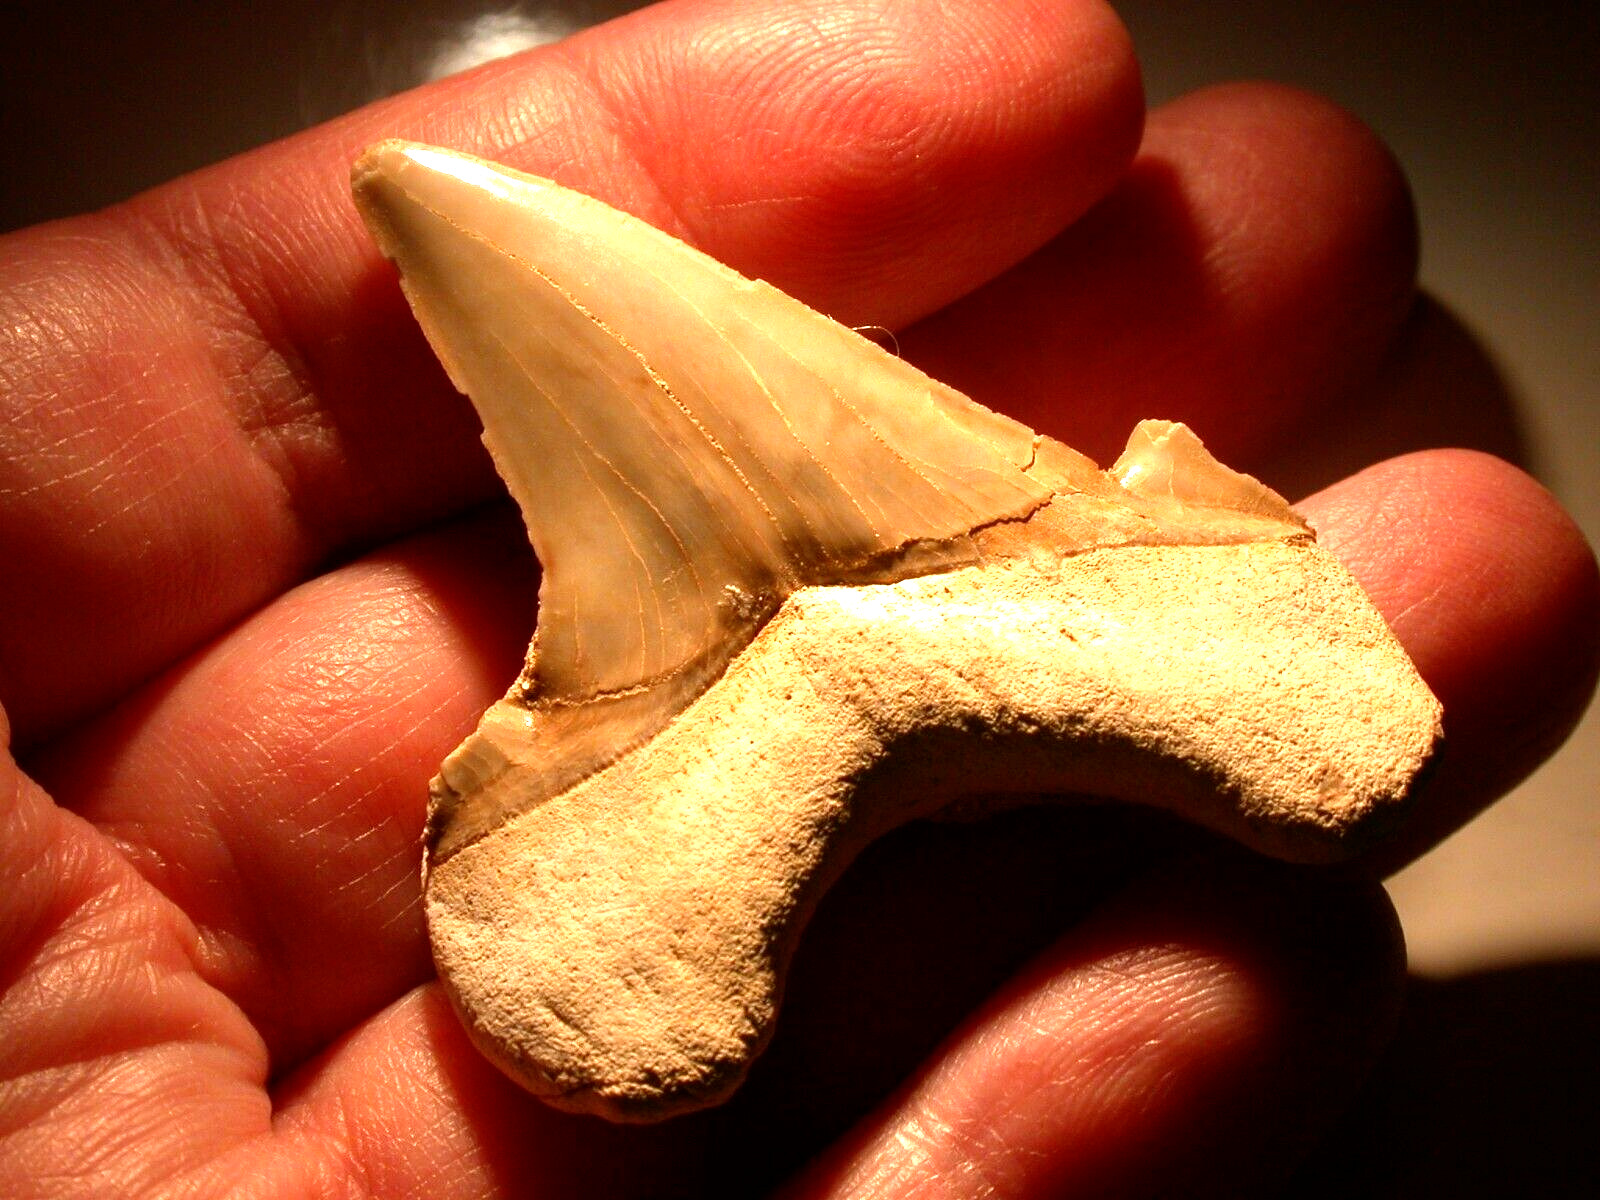 EXTINCT Large Otodus Fossil Shark Tooth 1.89 Inches Sharp Megalodon No Restoring